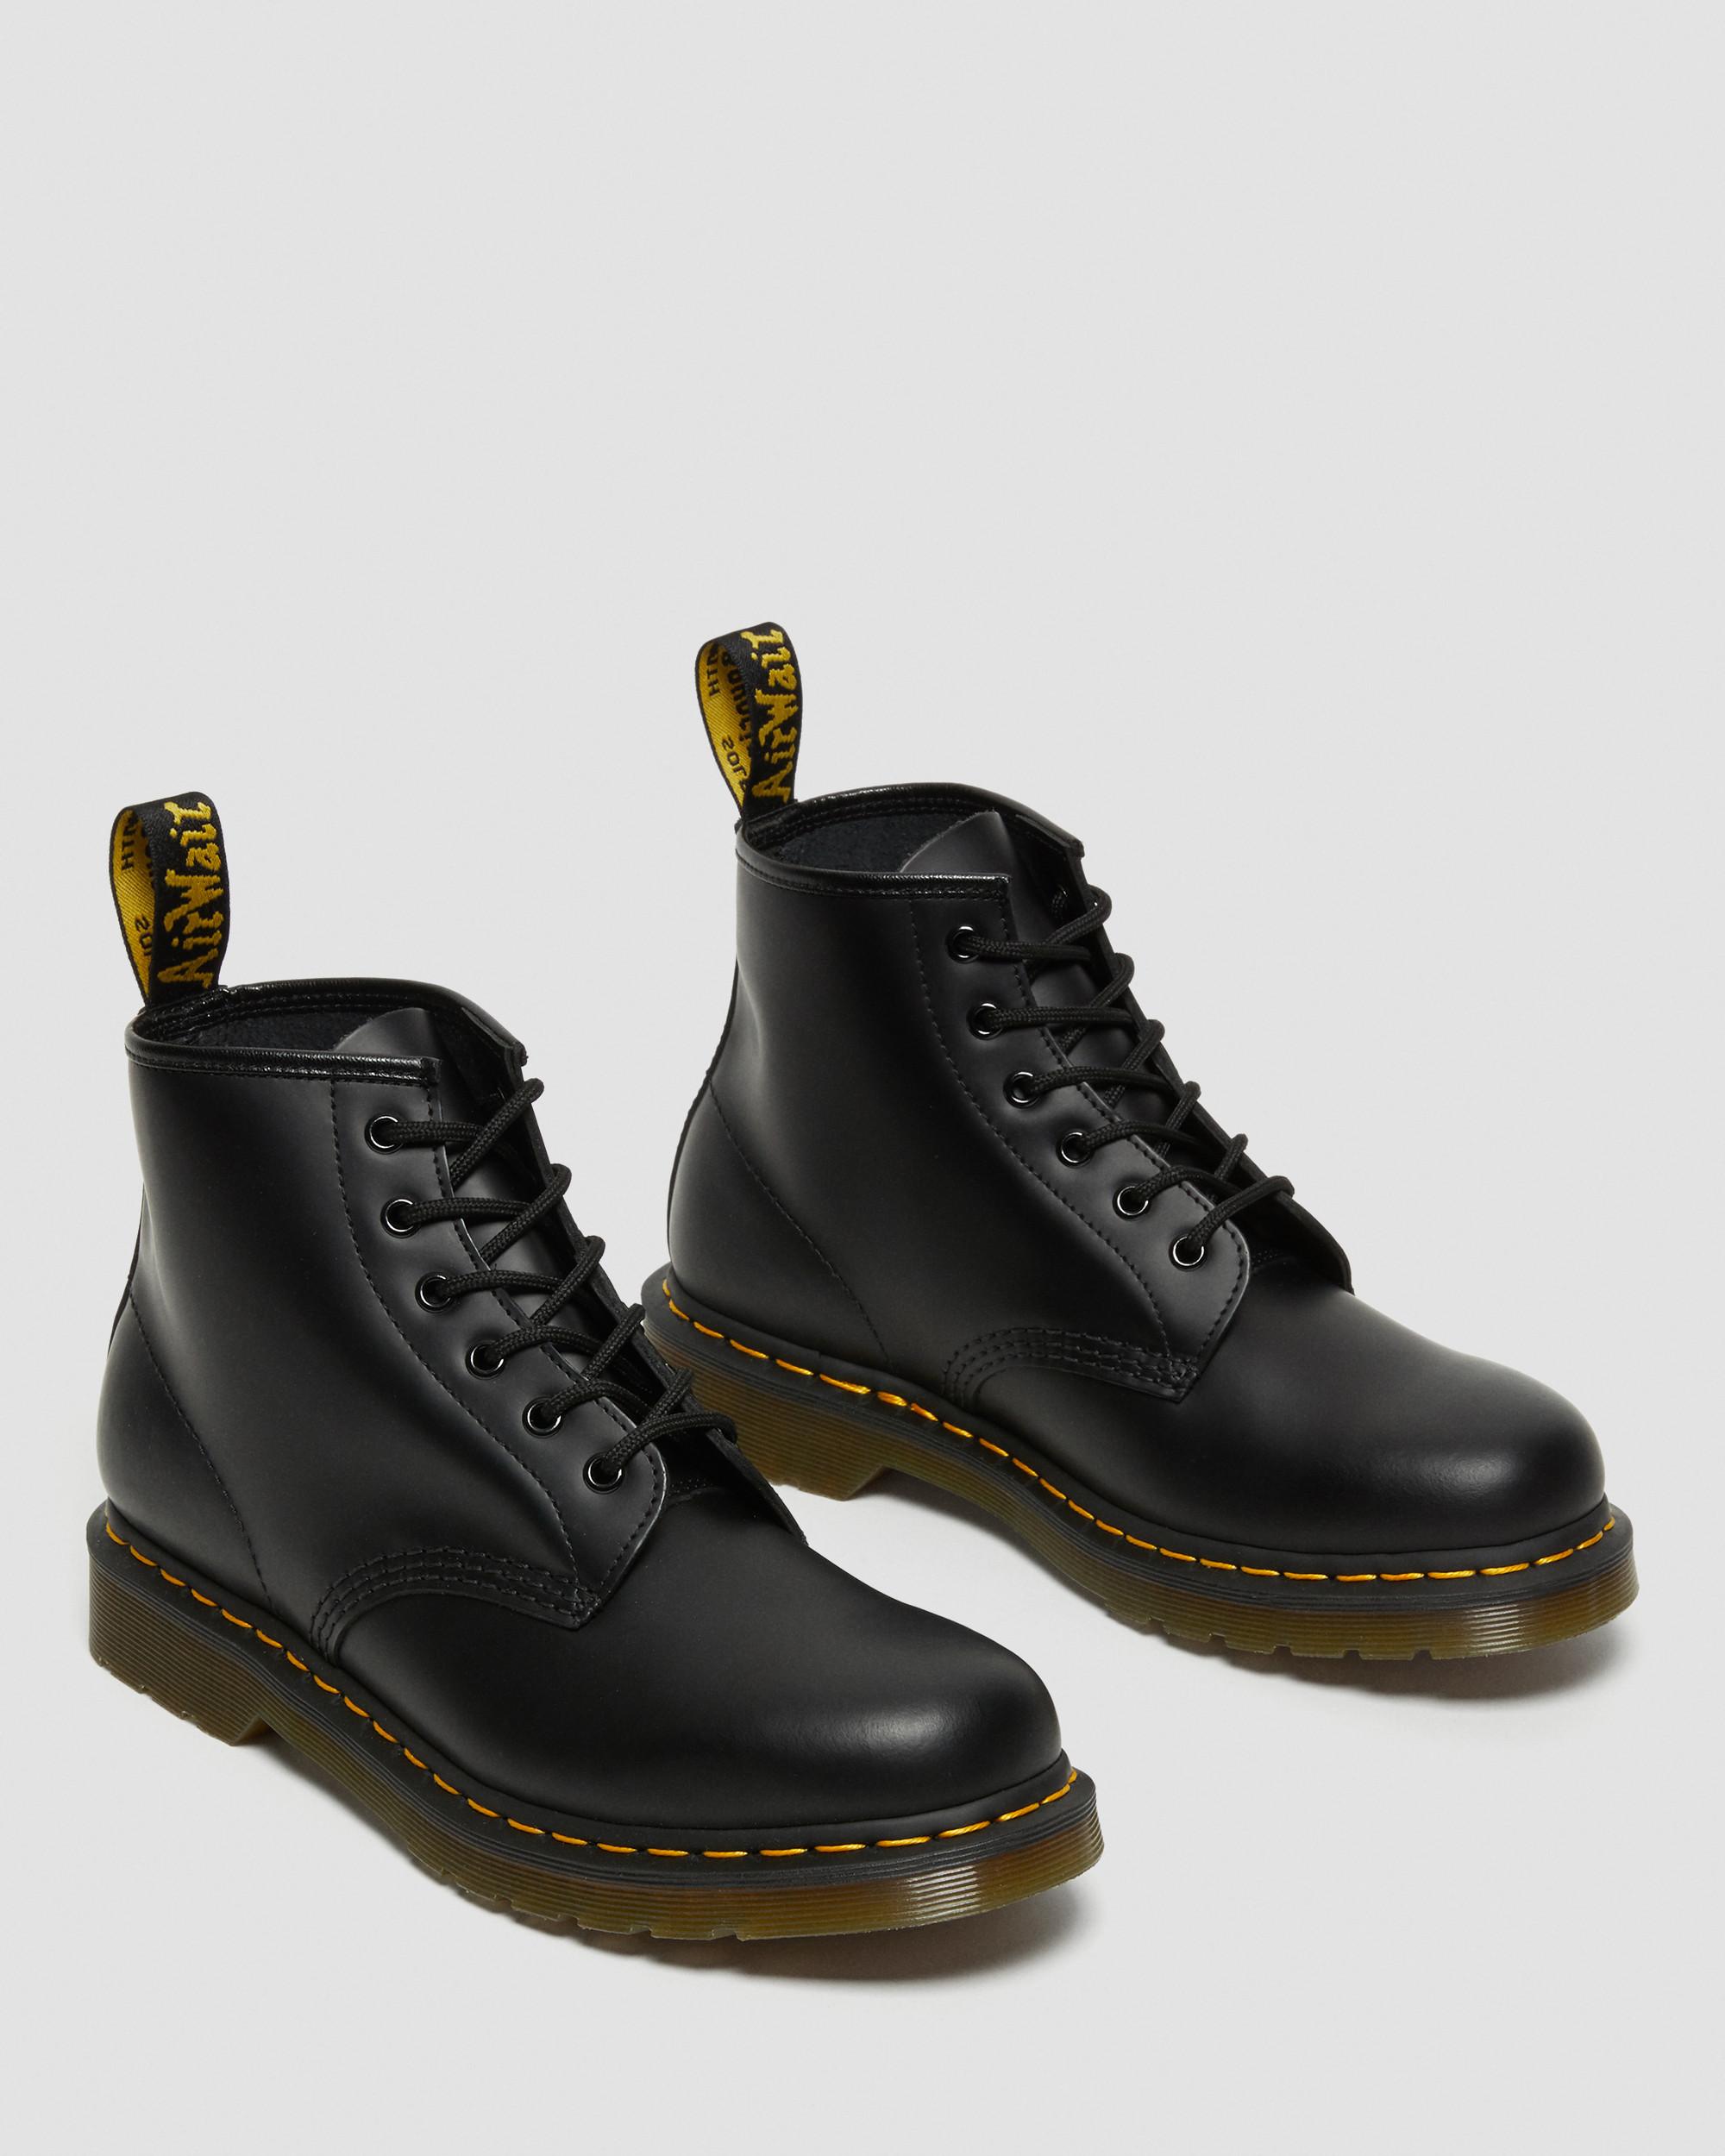 101 YELLOW STITCH SMOOTH LEATHER ANKLE BOOTS | Dr. Martens Official